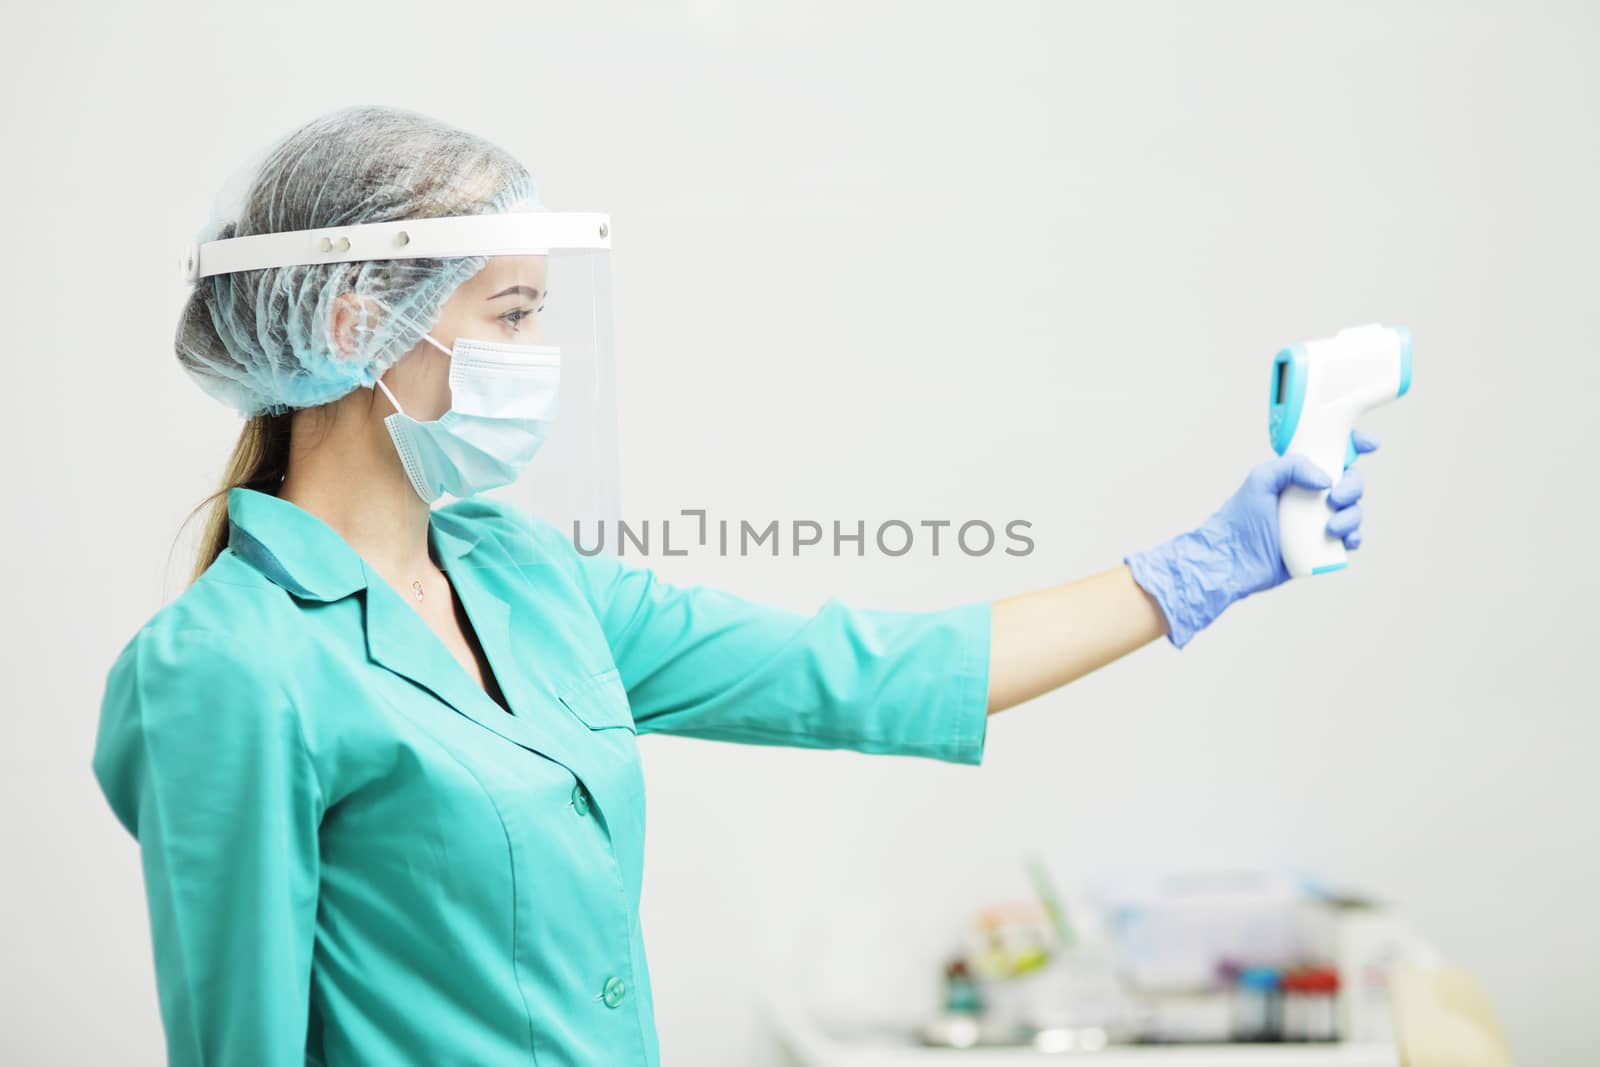 Female doctor or nurse in protective mask at hospital holds pyrometer in hand. Safety measures against the coronavirus. Prevention Covid-19 healthcare concept. Stethoscope over the neck.